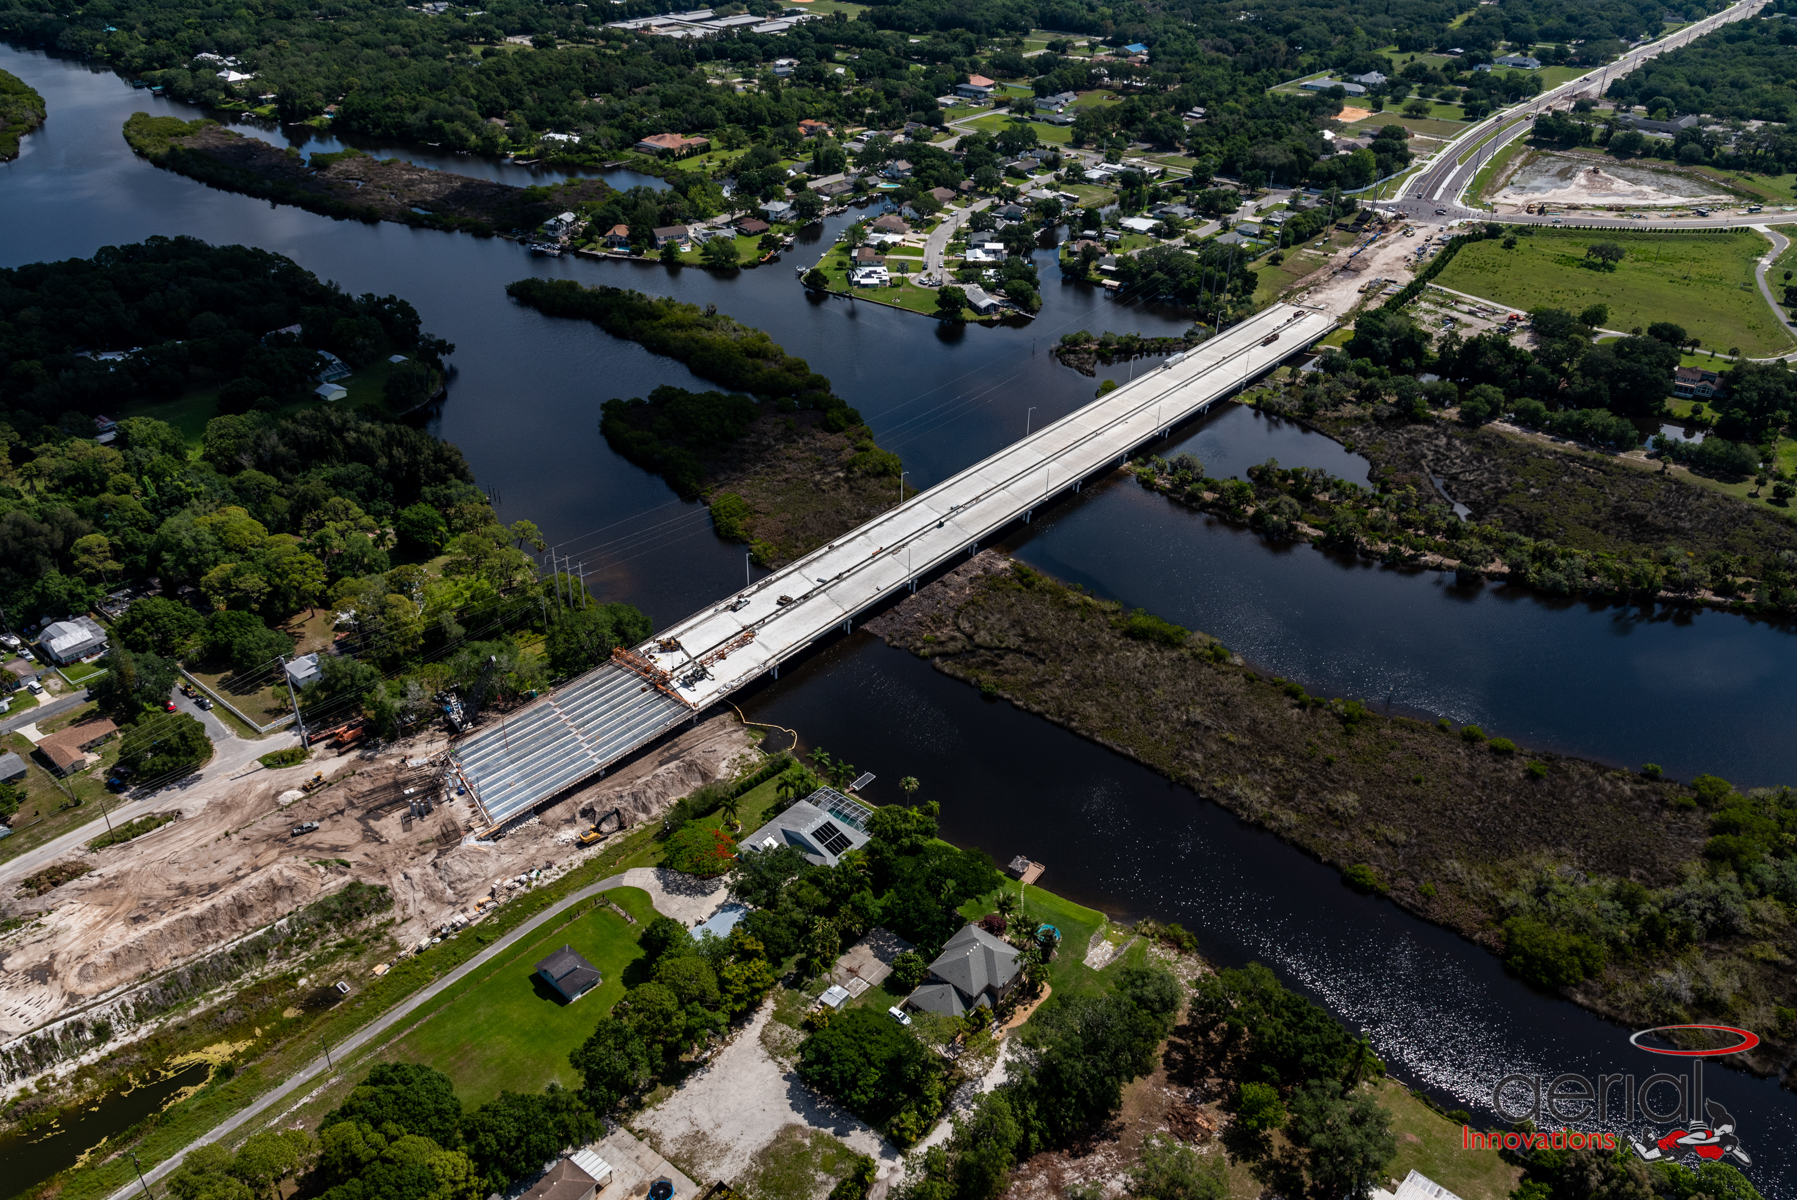 An overall view of the Braden River Bridge